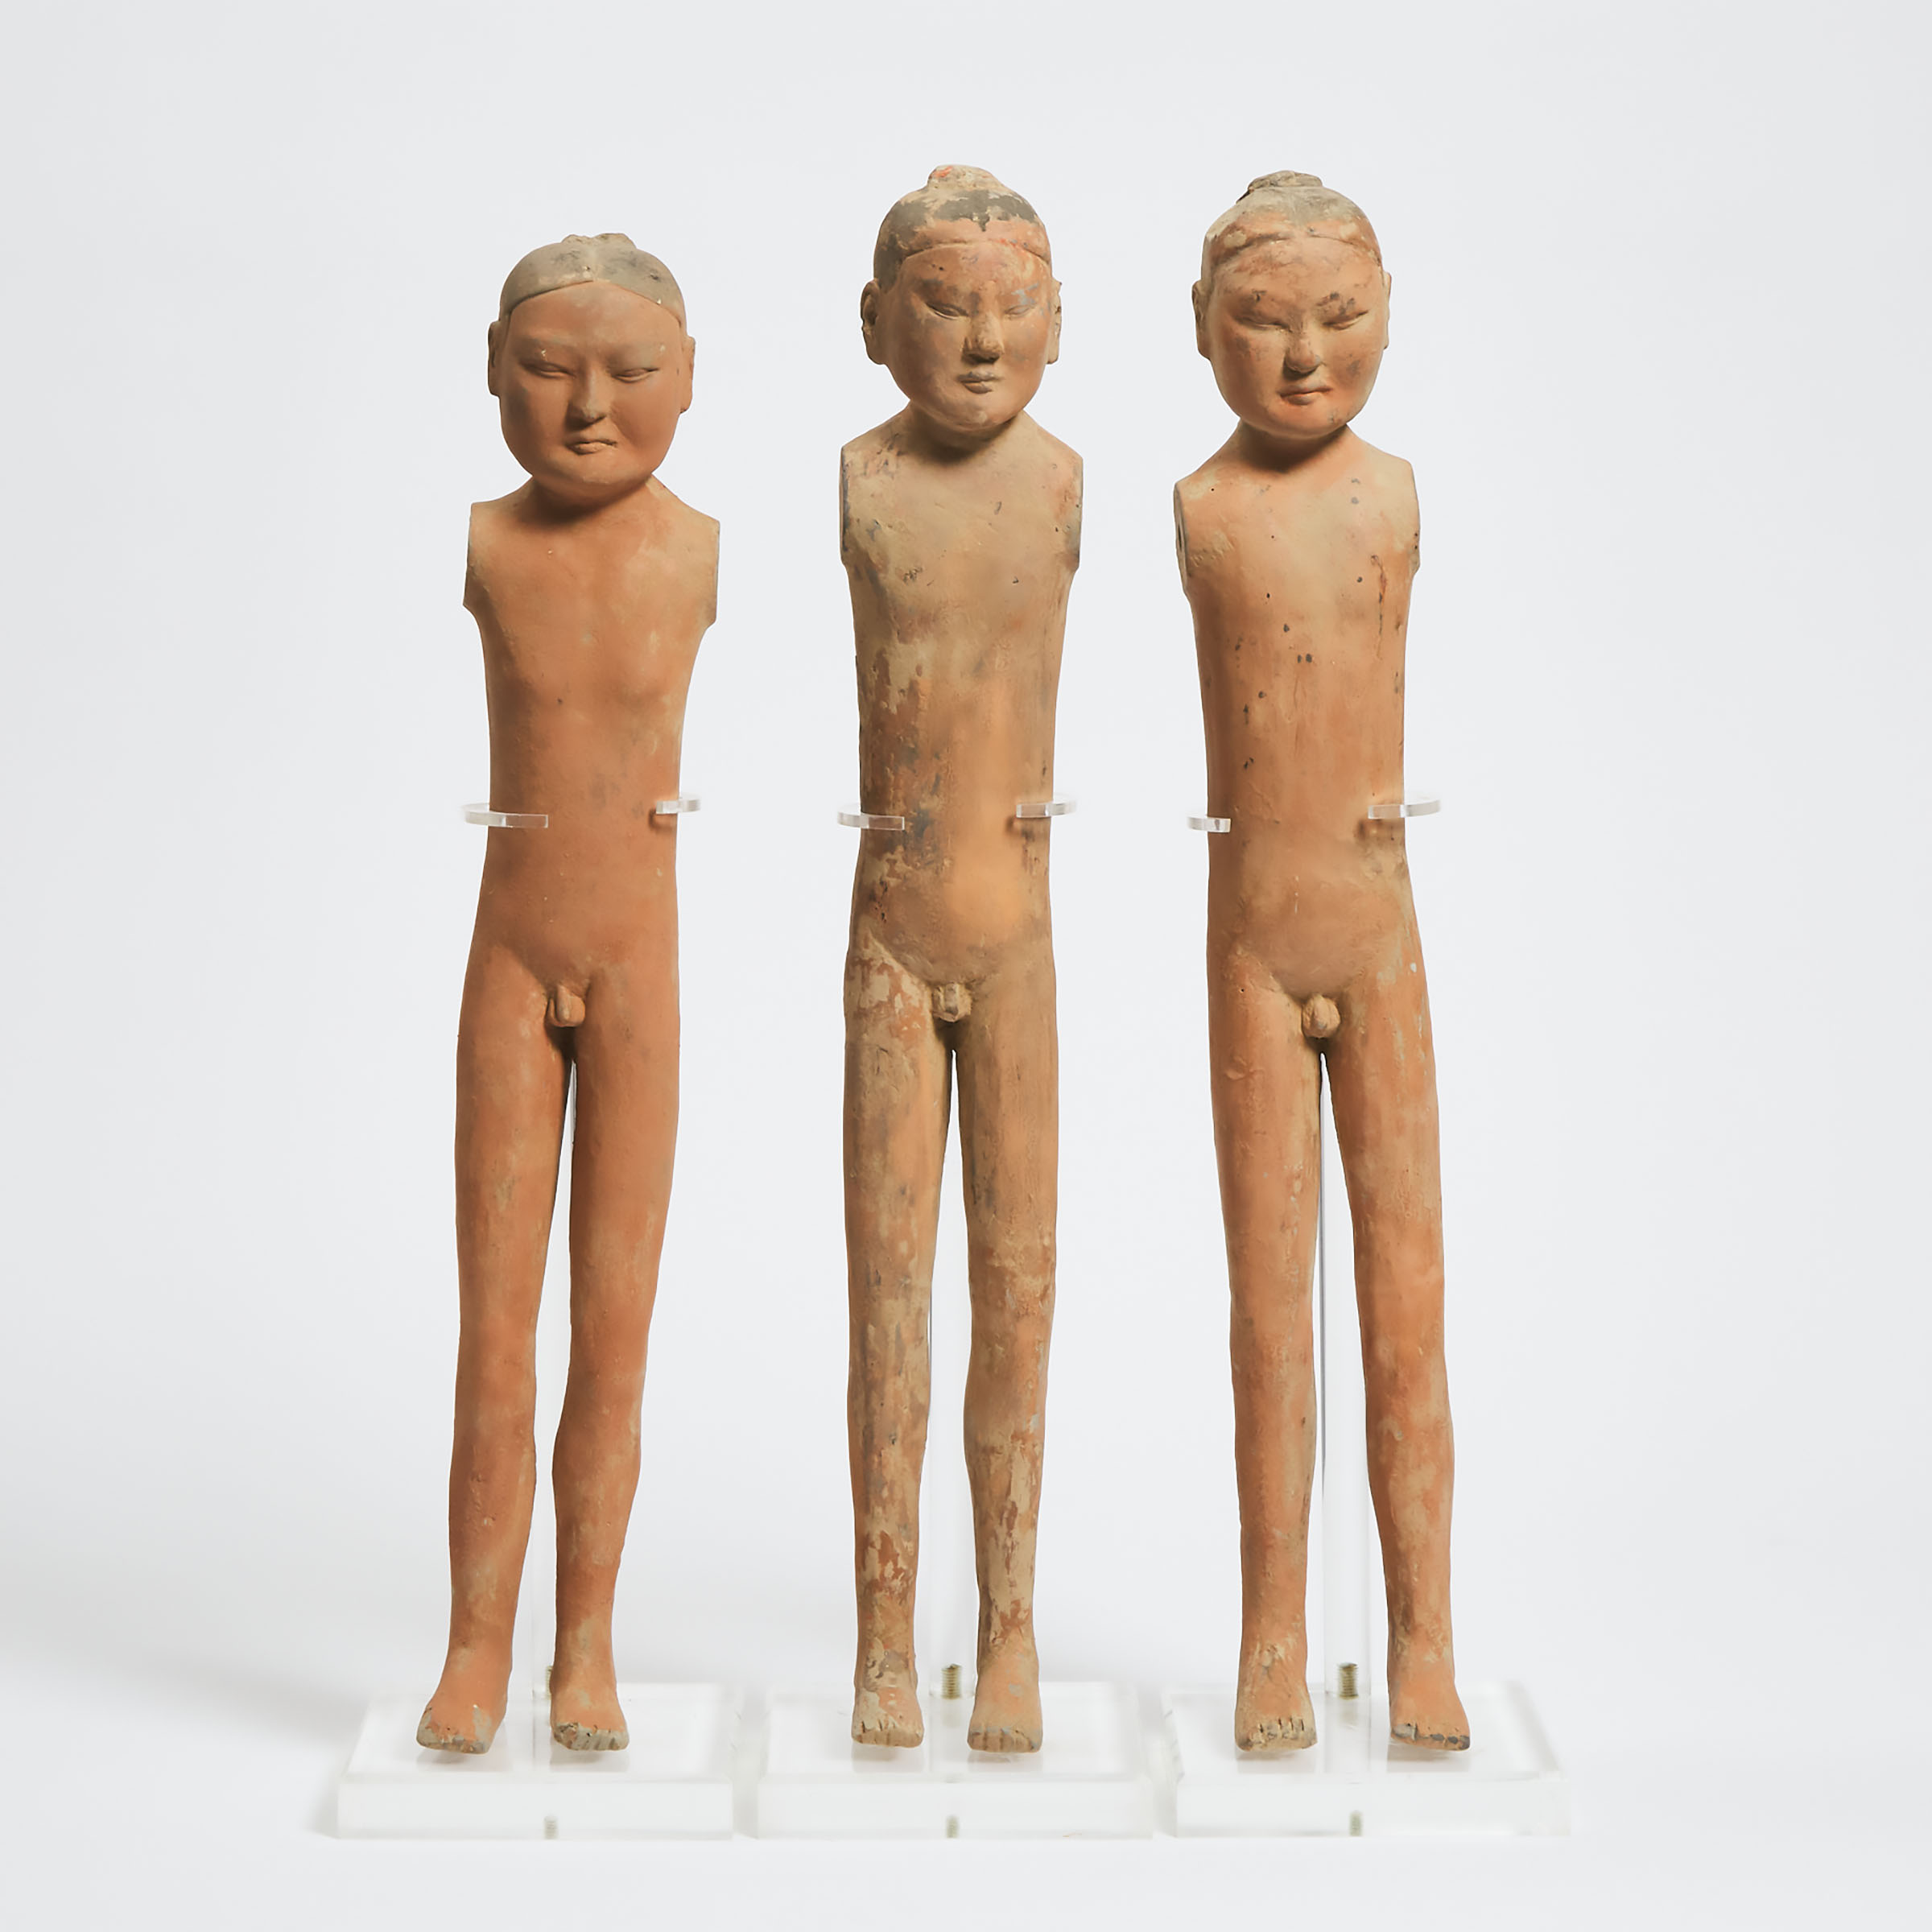 A Group of Three Pottery Figures